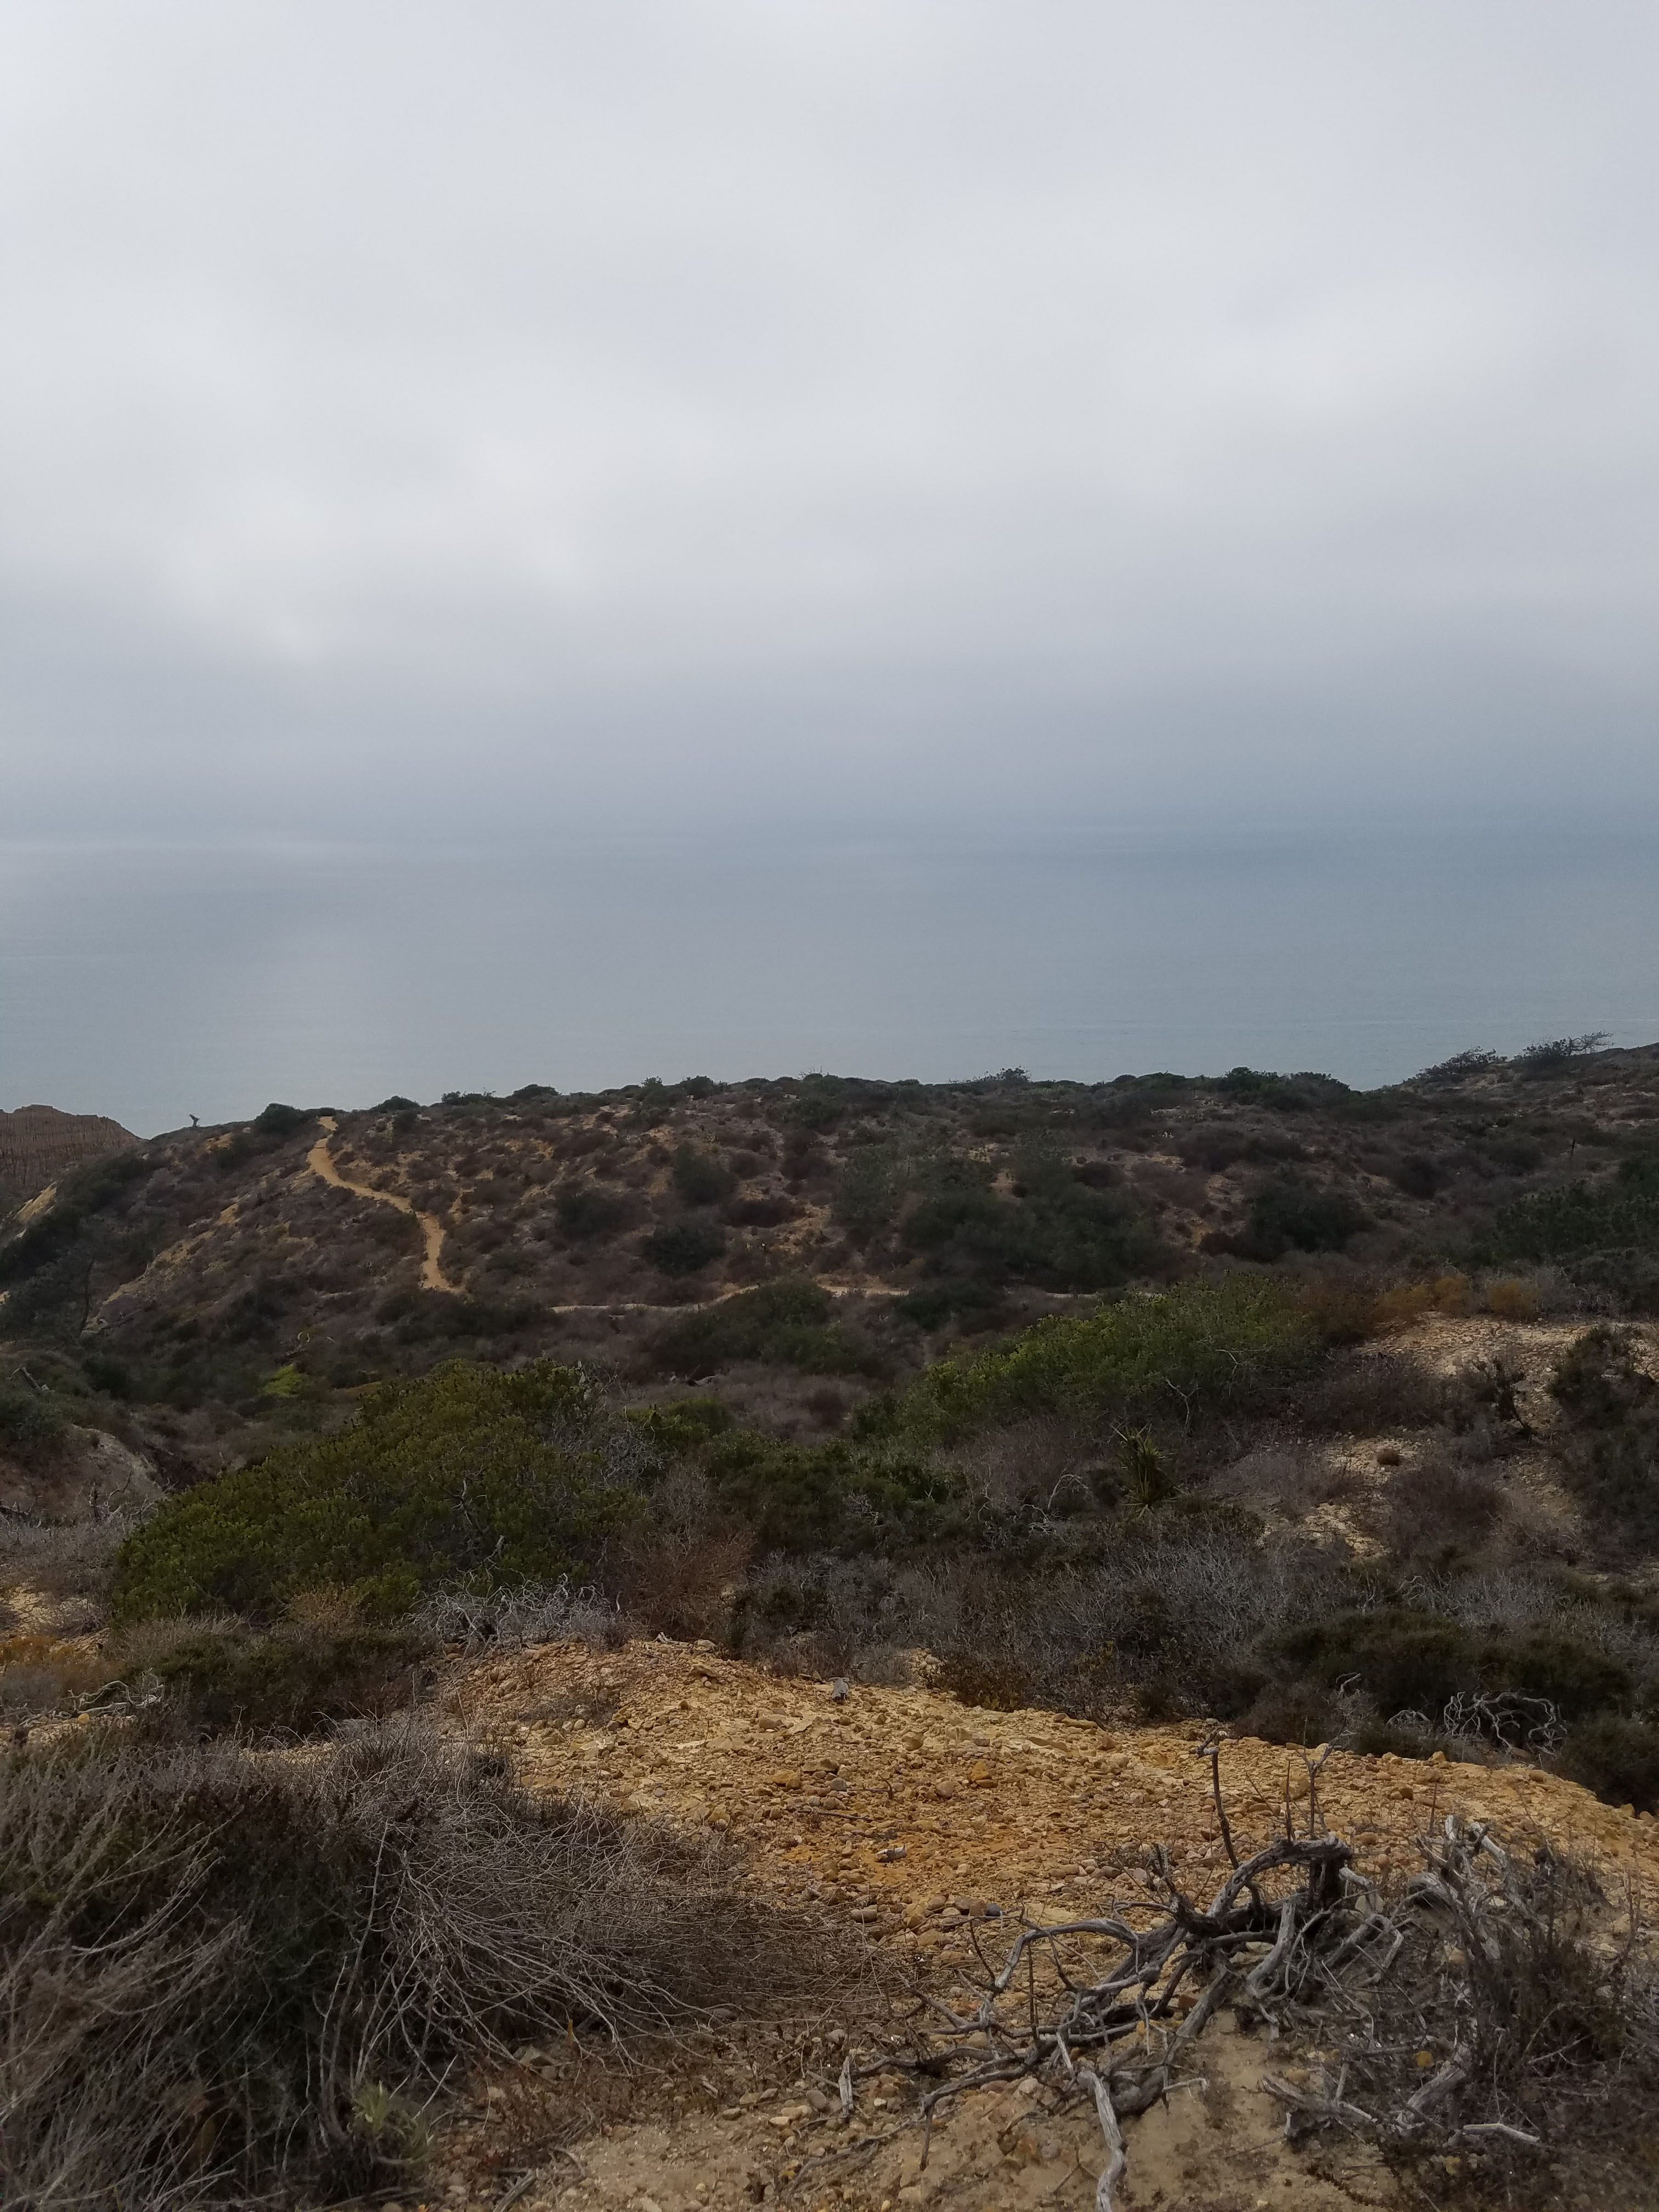 Torrey Pines Parry Grove Trail